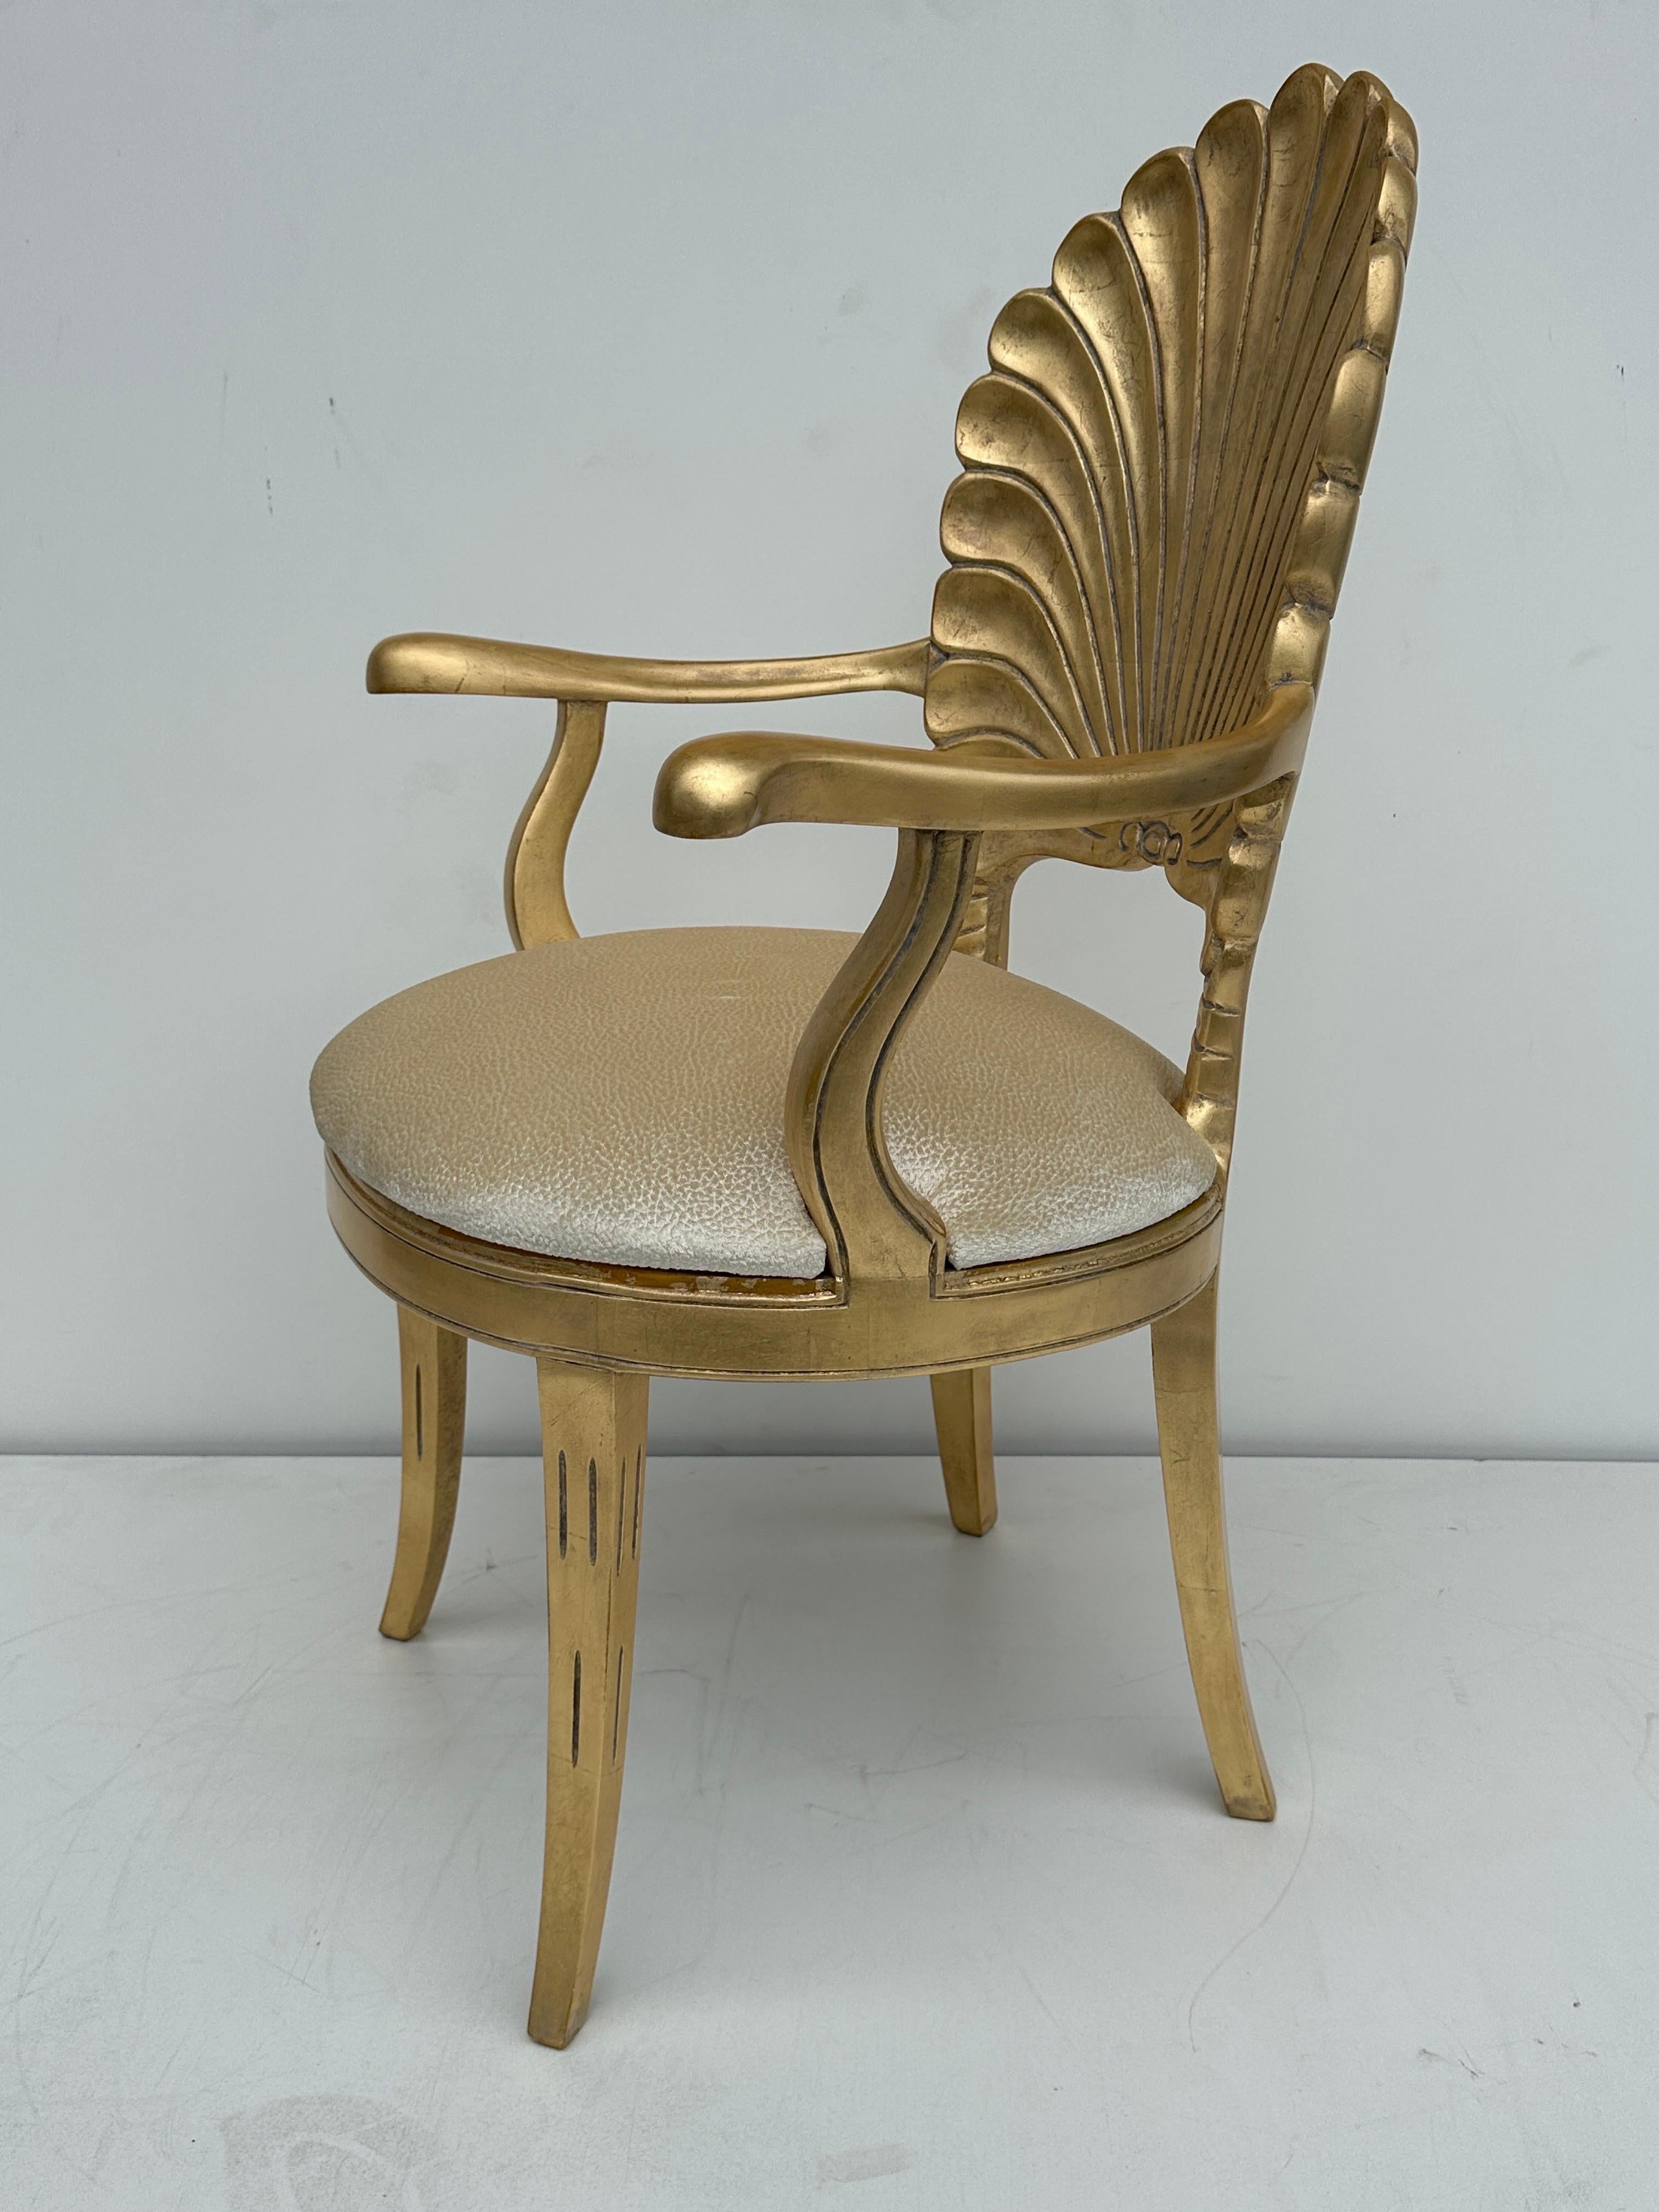 Antique gold leaf Venetian grotto style shell back armchair. Seat has been newly reupholstered in champagne color velvety fabric.
Arm height is 26.5